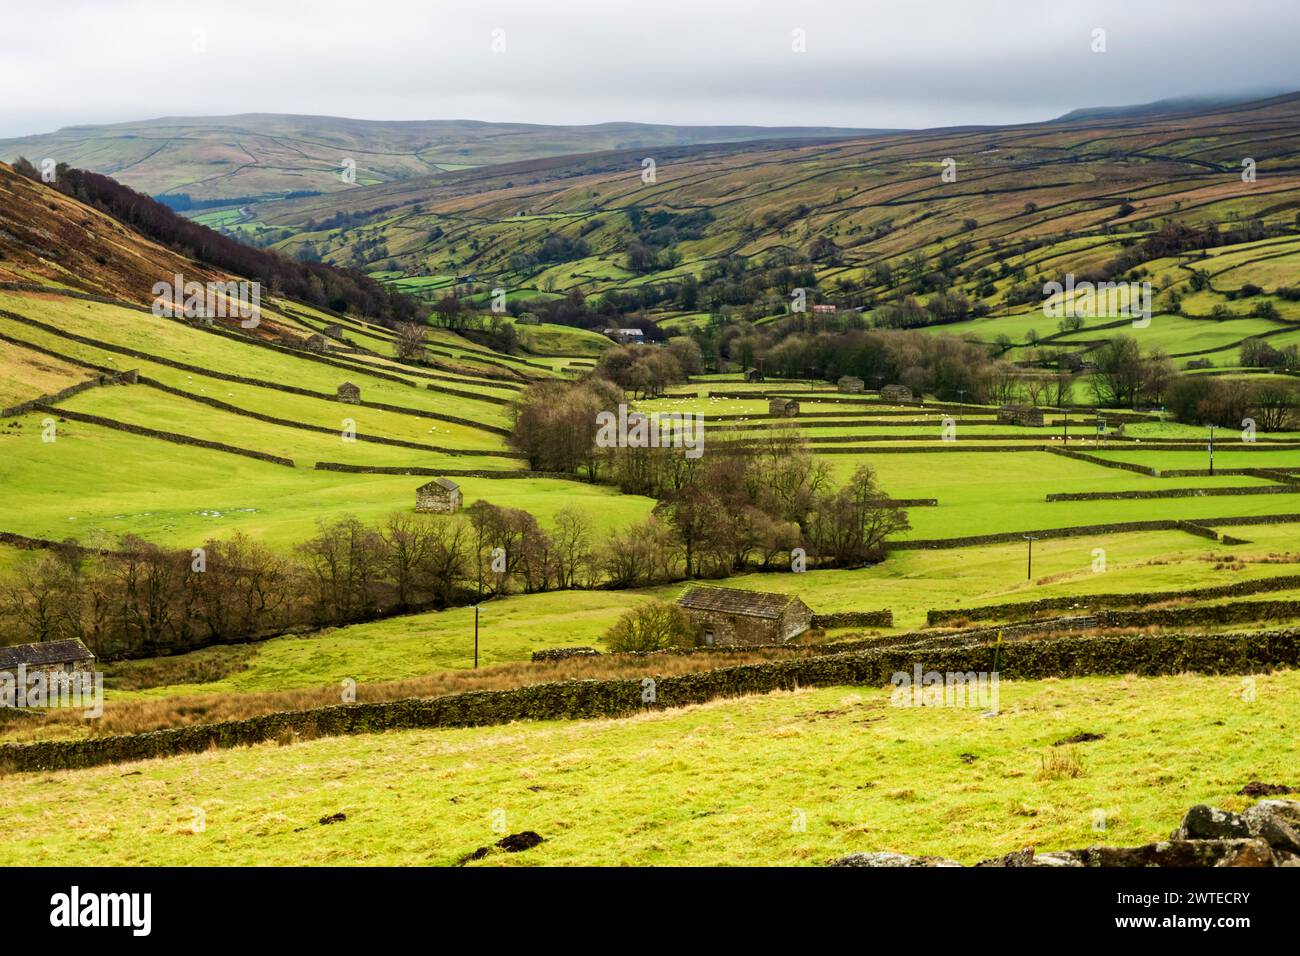 Swaledale, Yorkshire Dales National Park.  Iconic stone barns and dry stone walls of the narrow valley of the River Swale are popular with tourists. Stock Photo